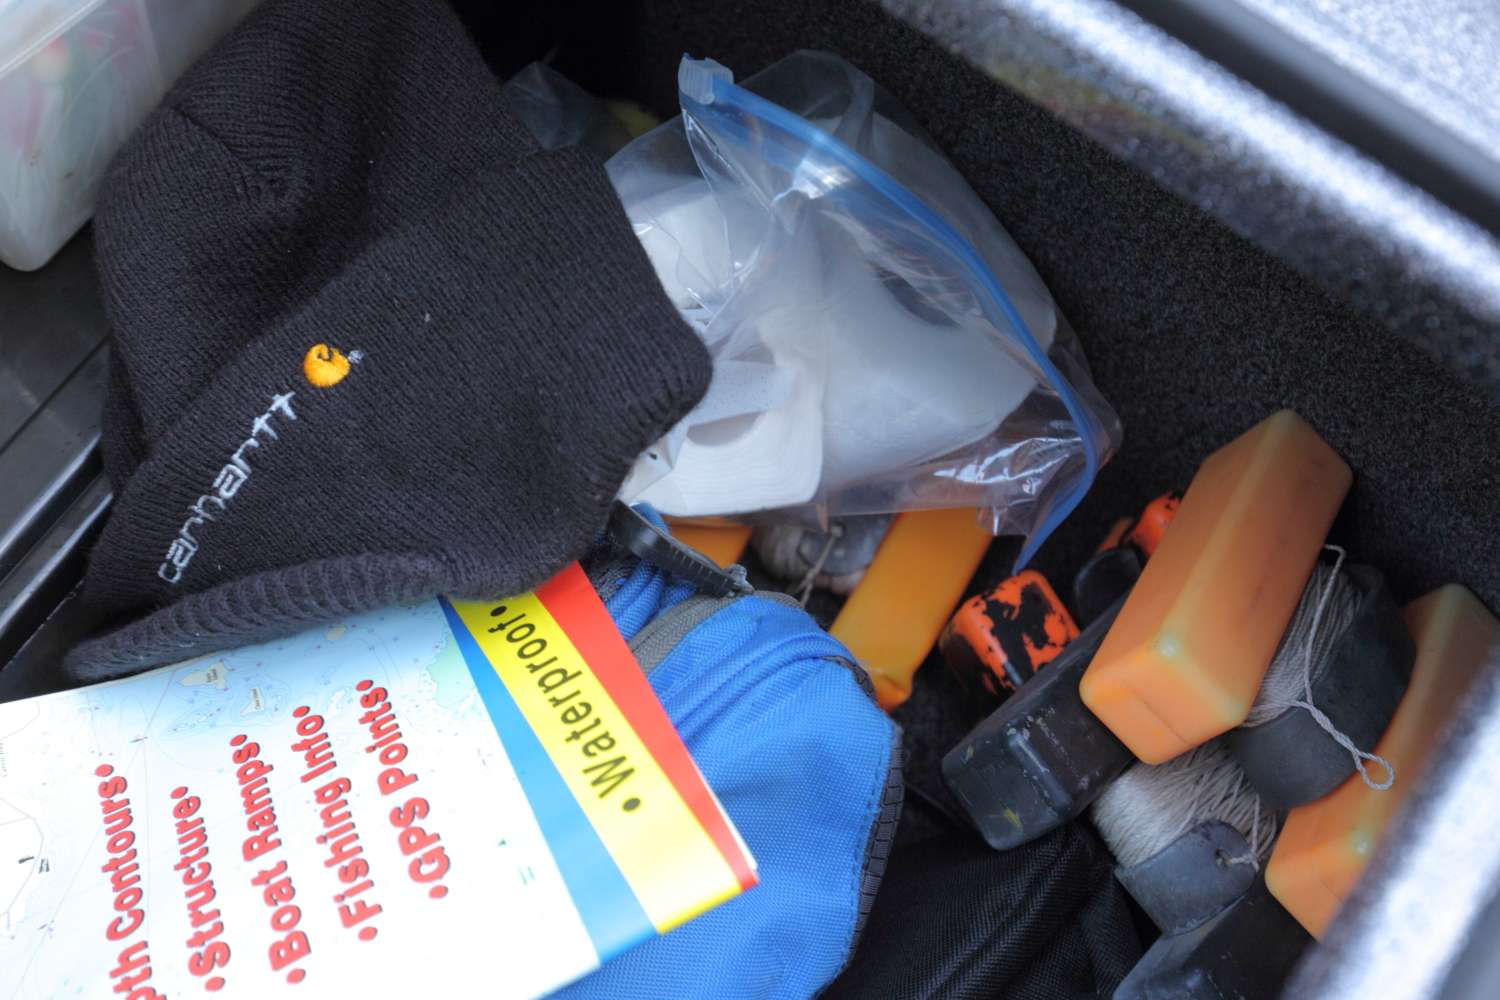 A Carhartt ski cap, toilet paper and marker buoys also fit in the compartment.